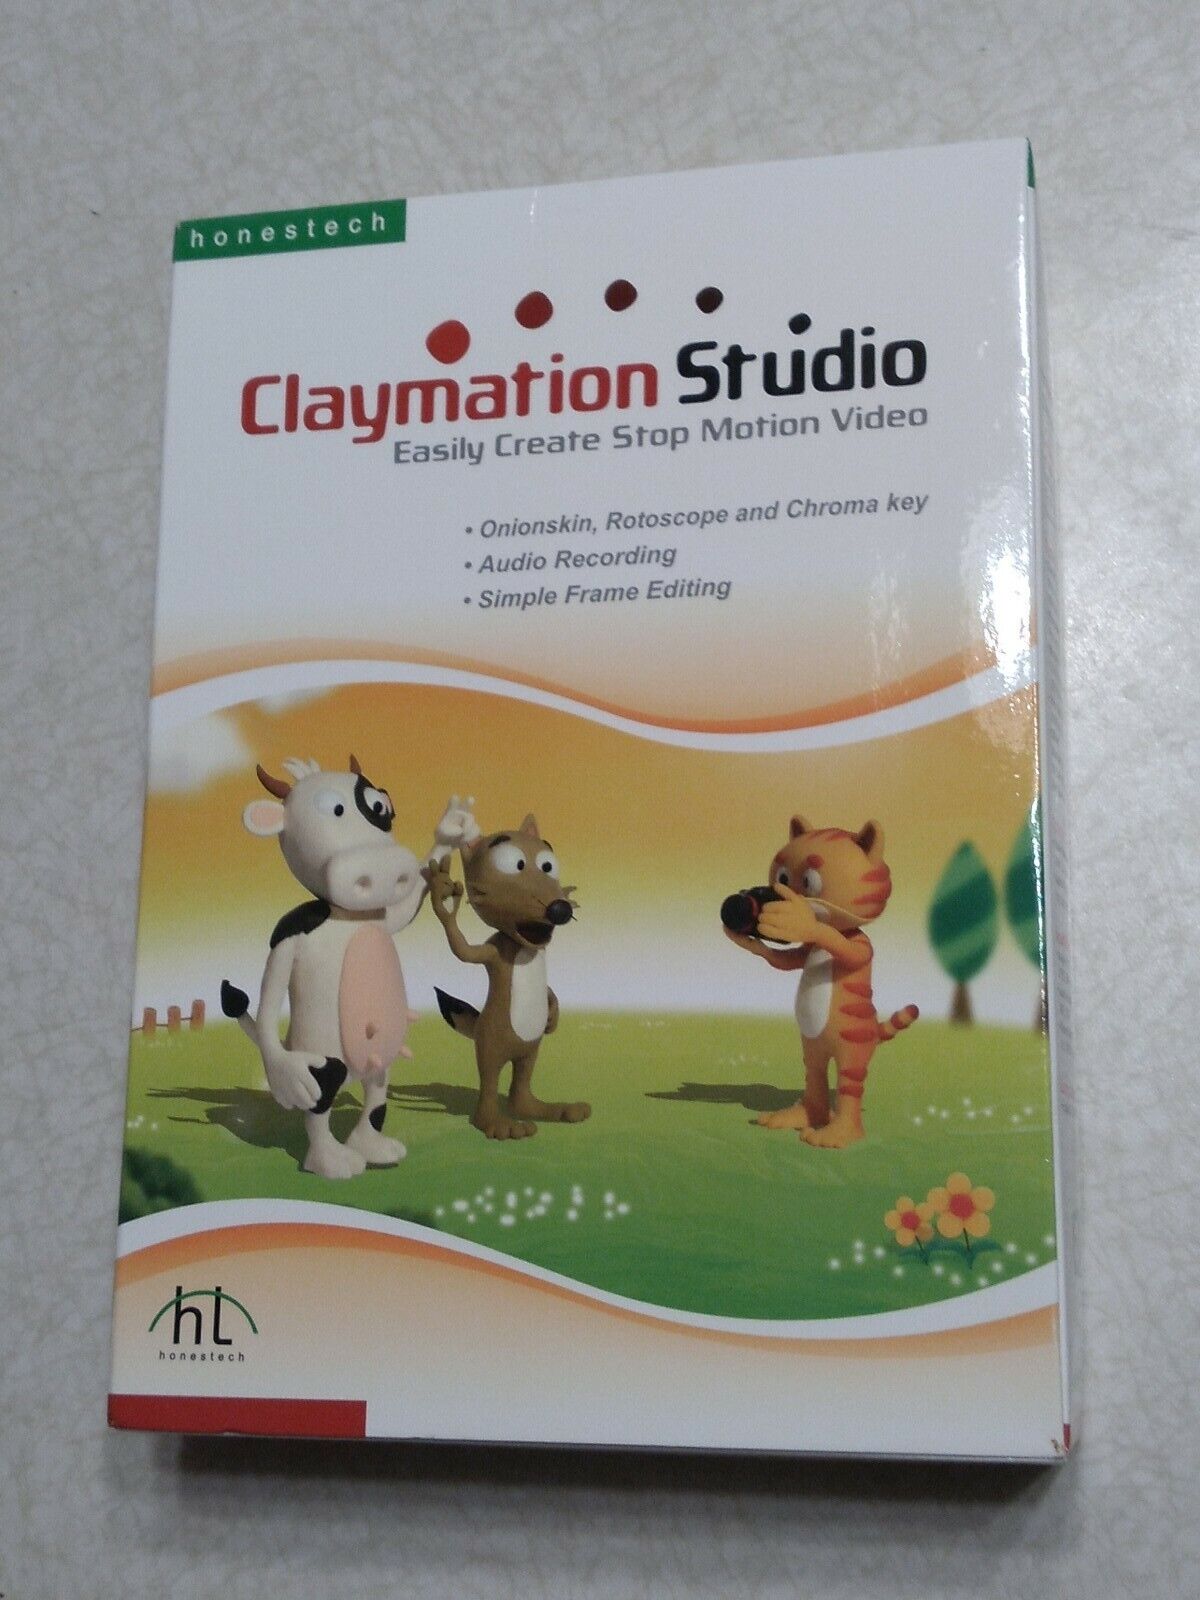 Honestech Claymation Studio Software Easily Create Stop Motion Video